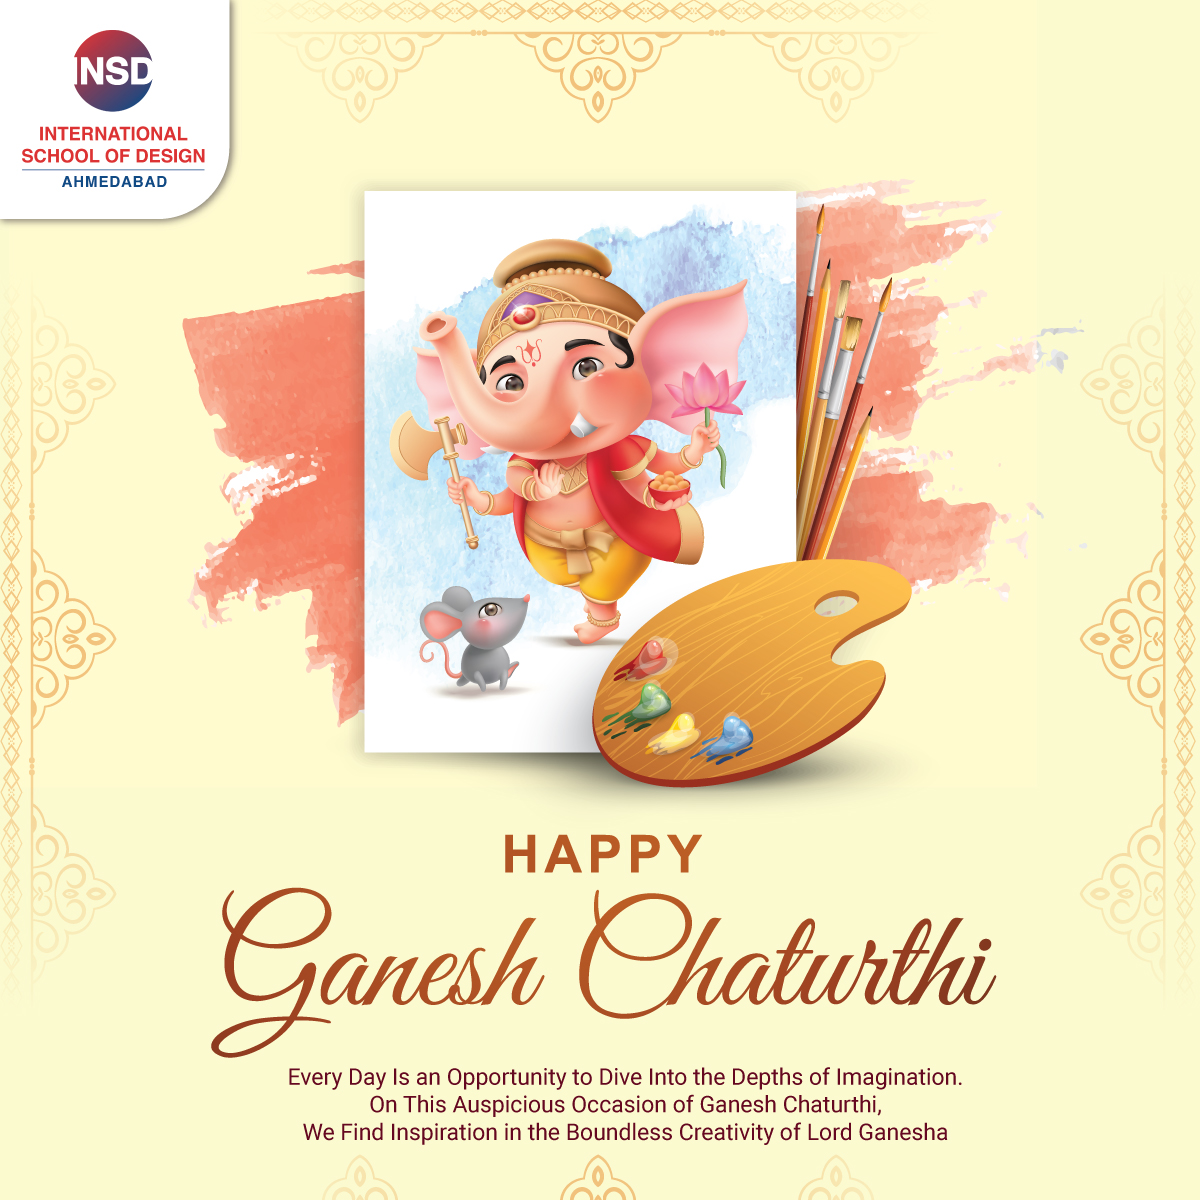 🎨🐘May your designs be as unique as the divine presence of Lord Ganesha. ✨

On this Ganesh Chaturthi, may your imagination flow freely, unburdened by conventions, and may your designs leave an indelible mark in the world of art and design. 🙏🌈

#GaneshChaturthi